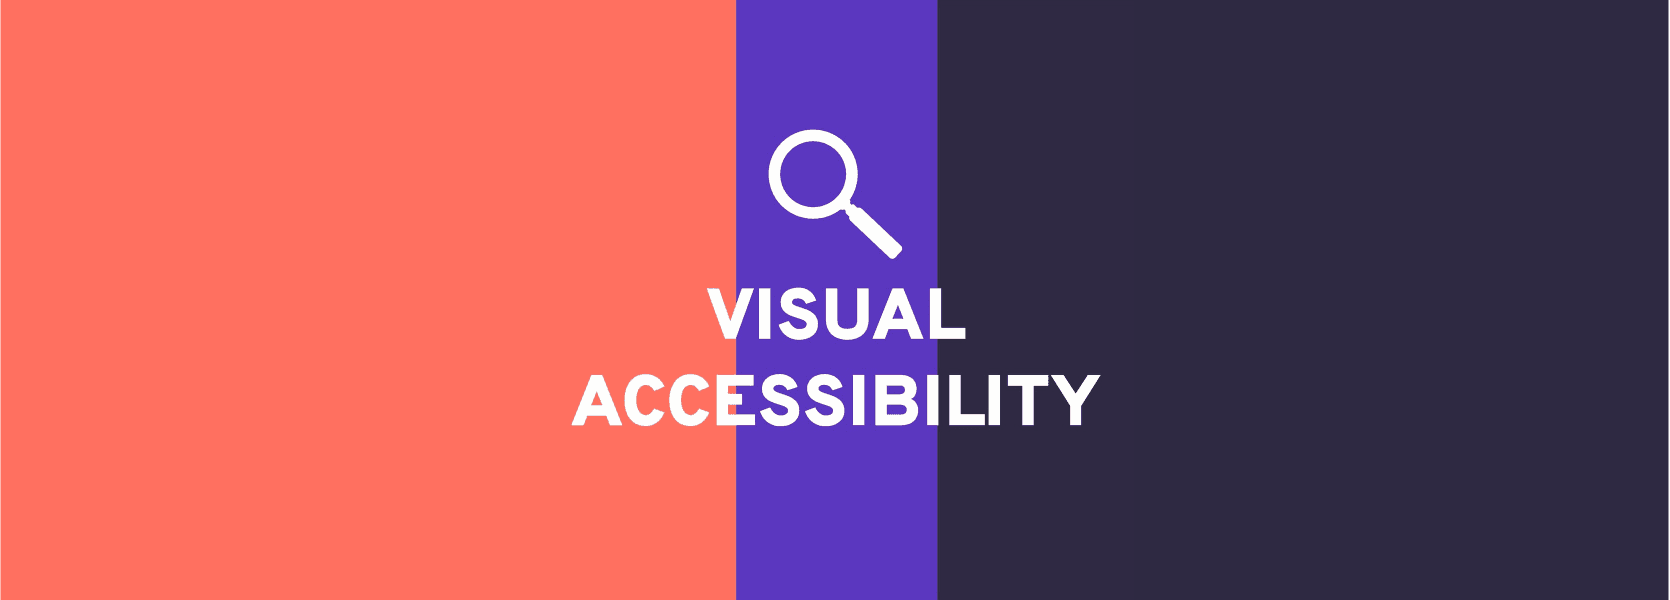 Magnifier icon and text "Visual accessibility" on a tricolor background.